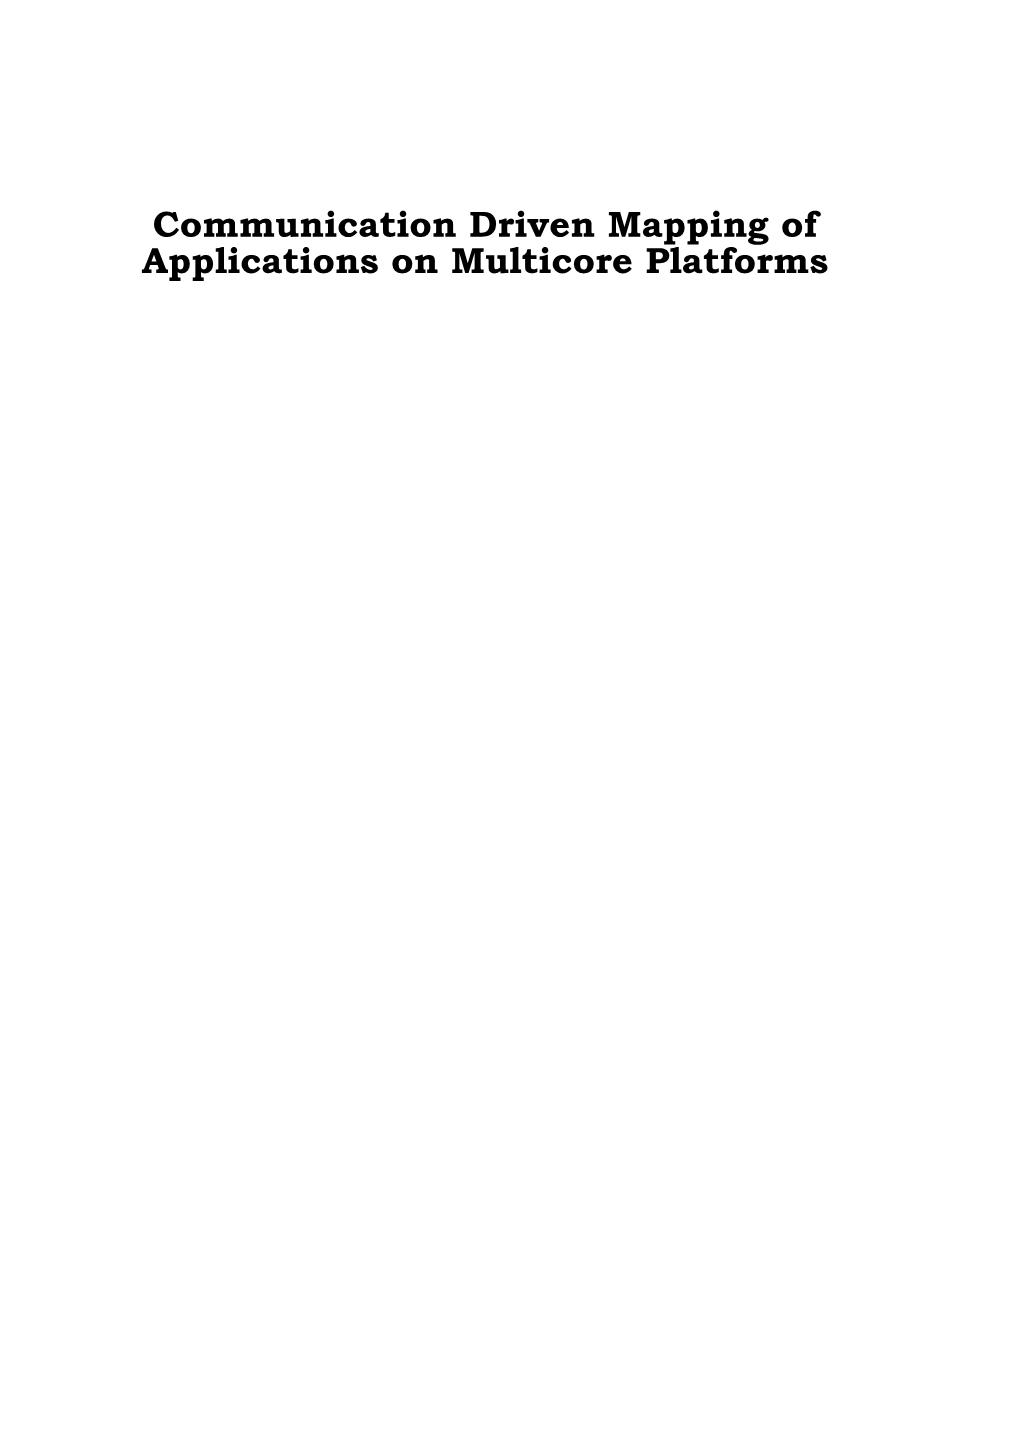 Communication Driven Mapping of Applications on Multicore Platforms